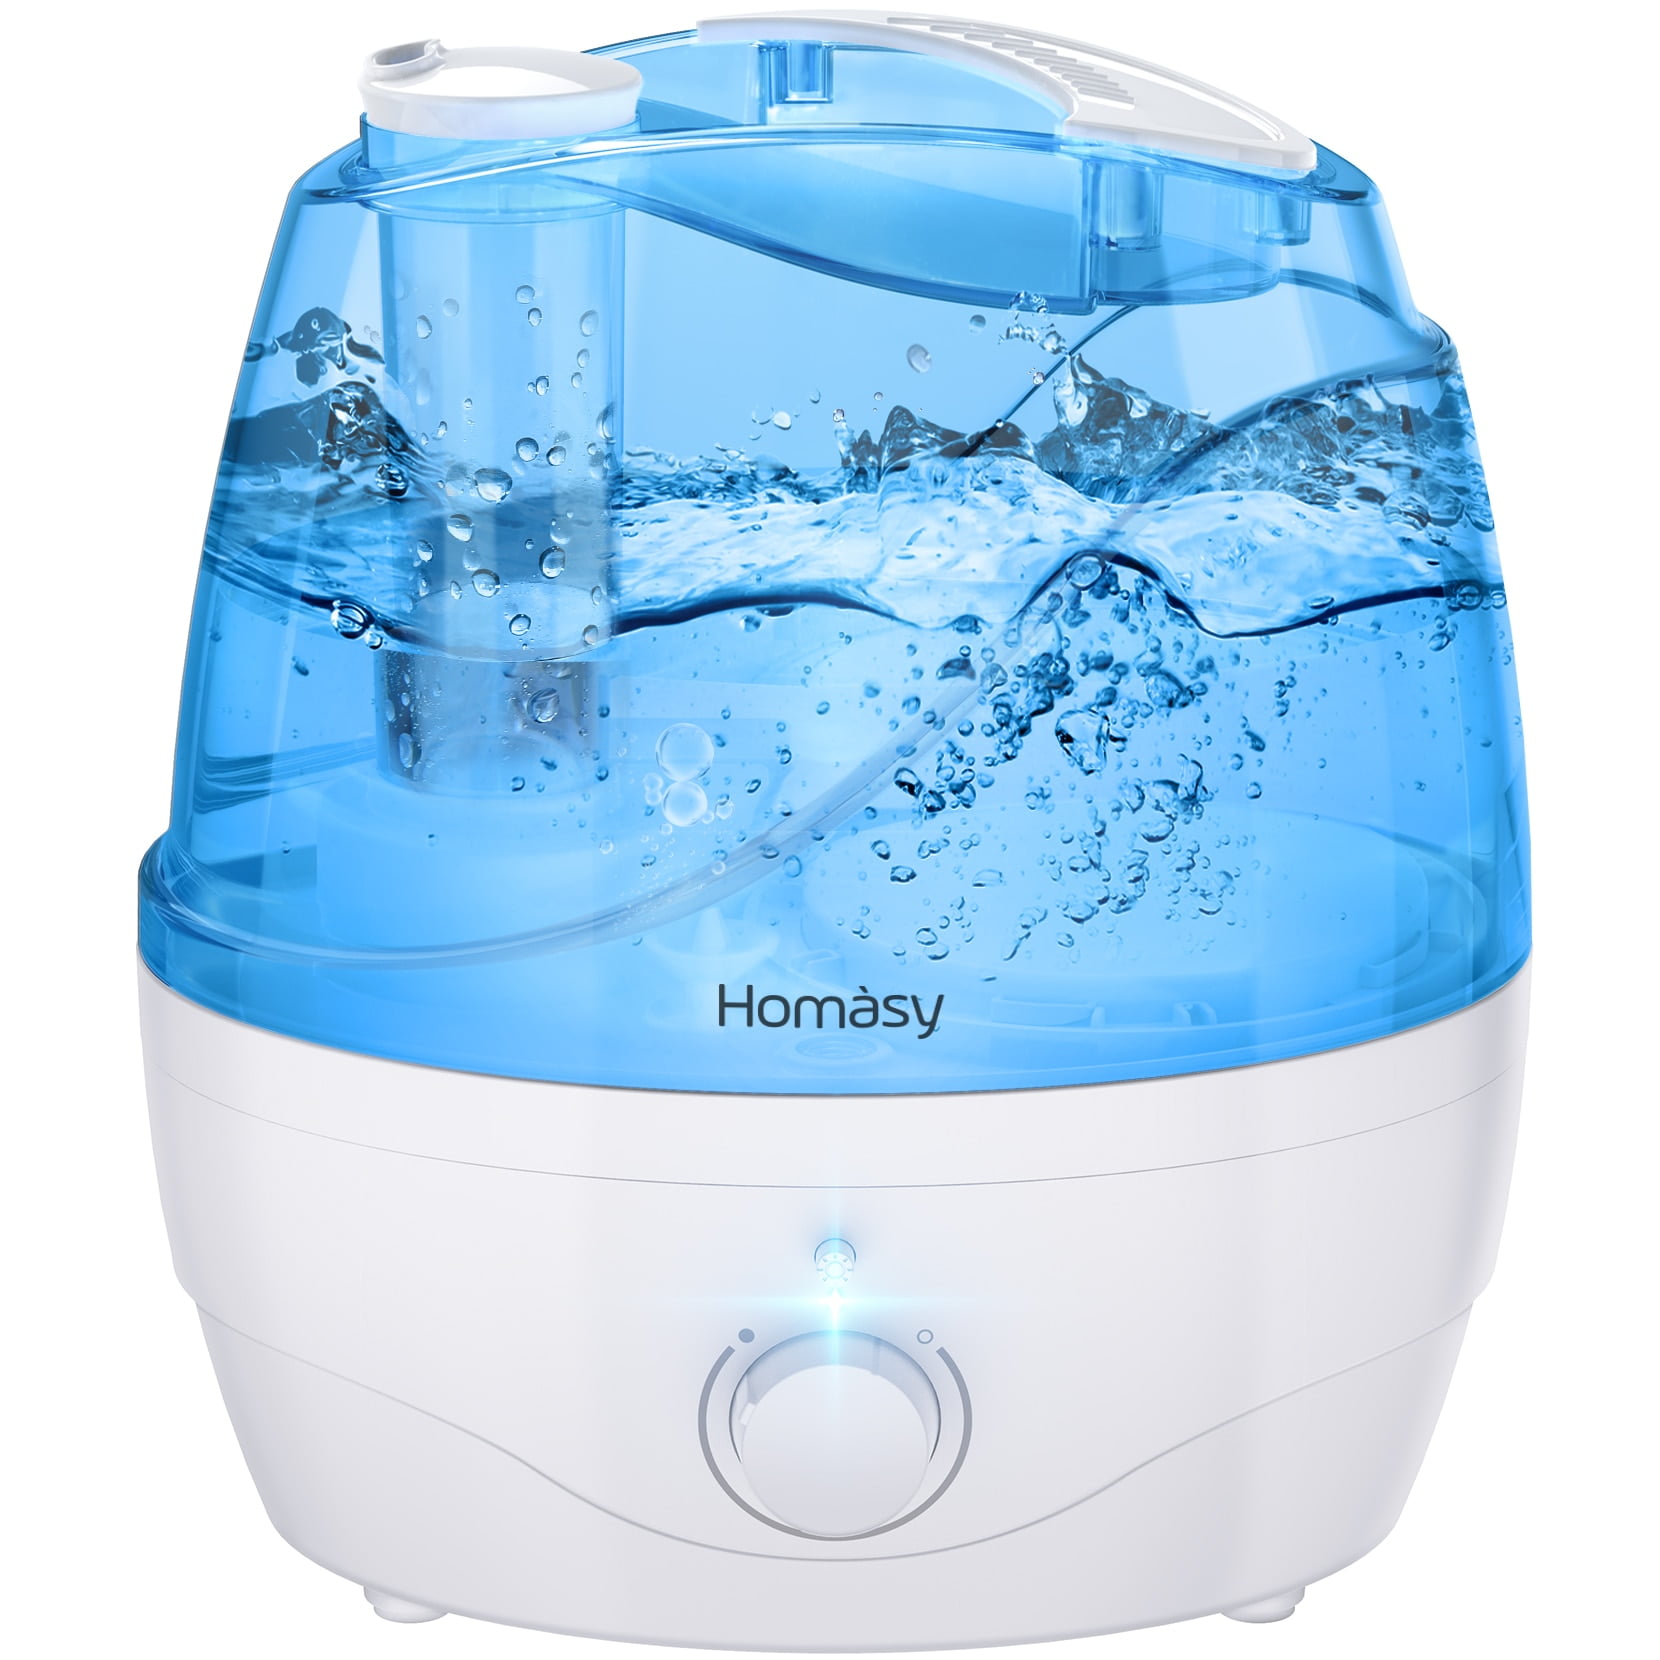 Homasy Cool Mist 2.5L Essential Oil Diffuser,Top-Fill Air Dial Knob,28dB Ultra-Quiet Humidifier with Warm Night Light,30h Working Time,BPA Free for Baby Bedroom,Home Office Yellow